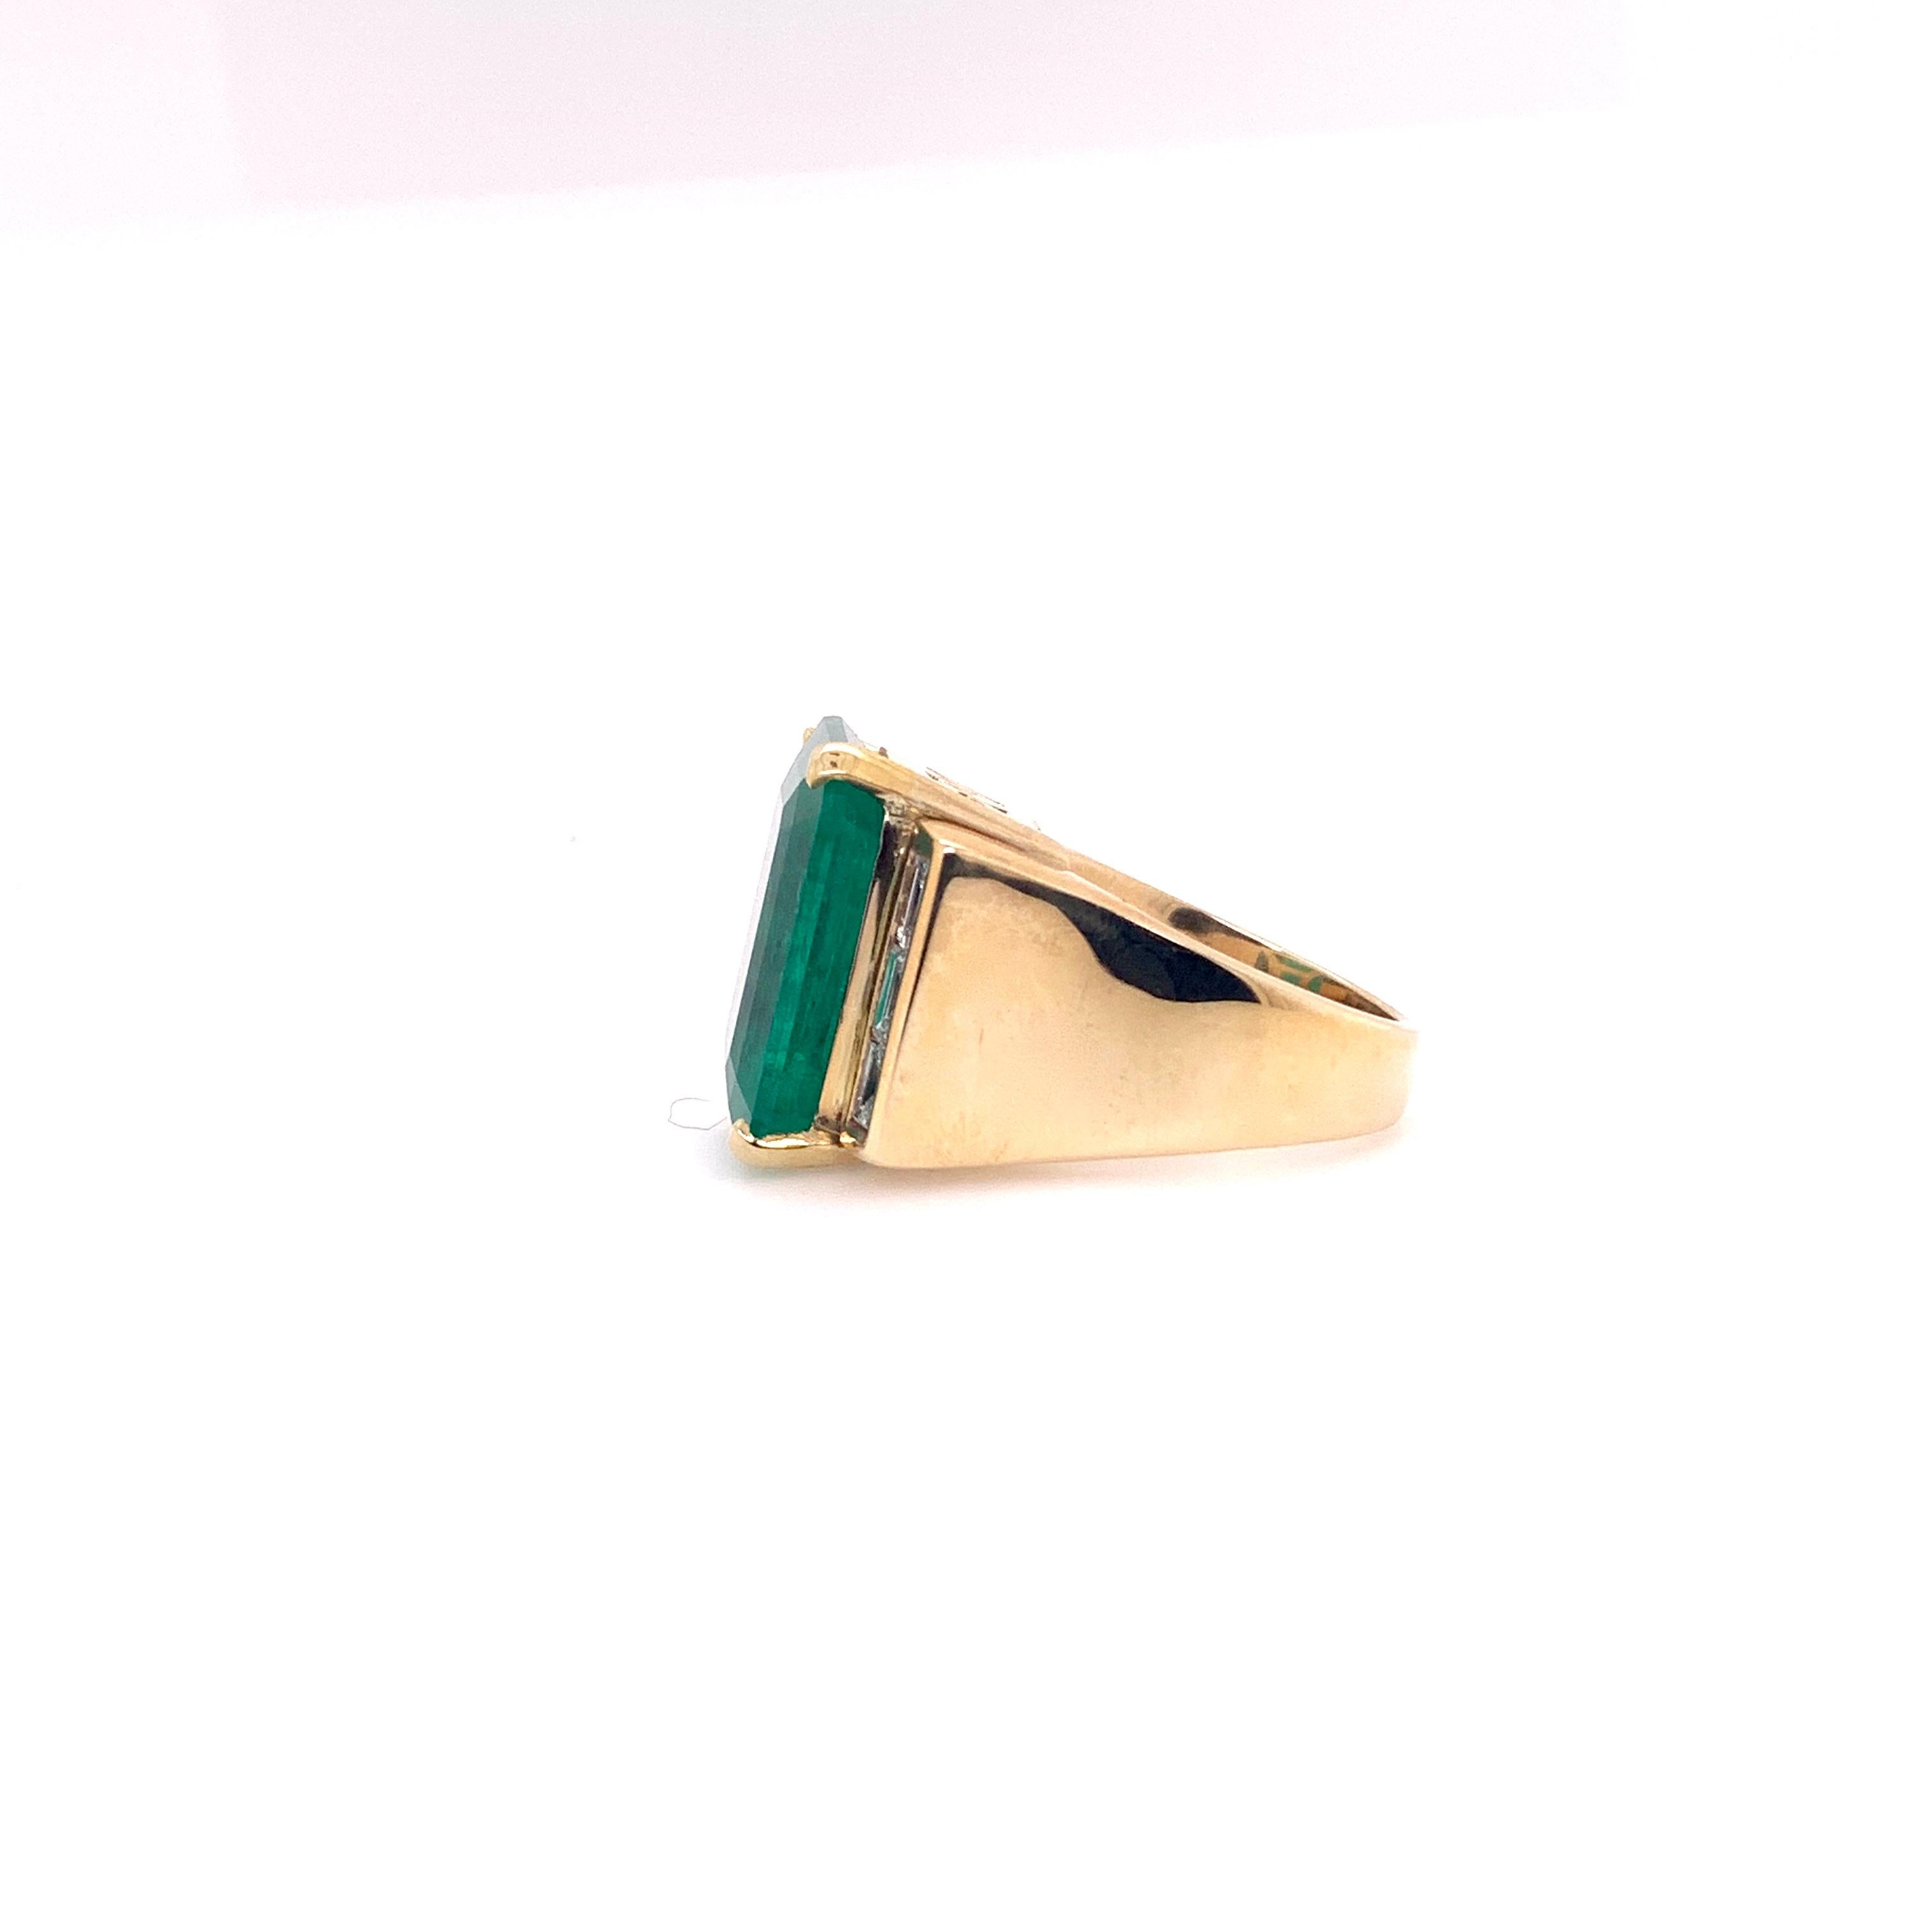 This gigantic GIA certified Columbian Emerald weights 18.07 cts and is set in a 14k yellow gold handmade setting.   The 3 vertical straight diamond baguettes are channel set on each side of the emerald in this heavy, bold yellow gold setting.   This